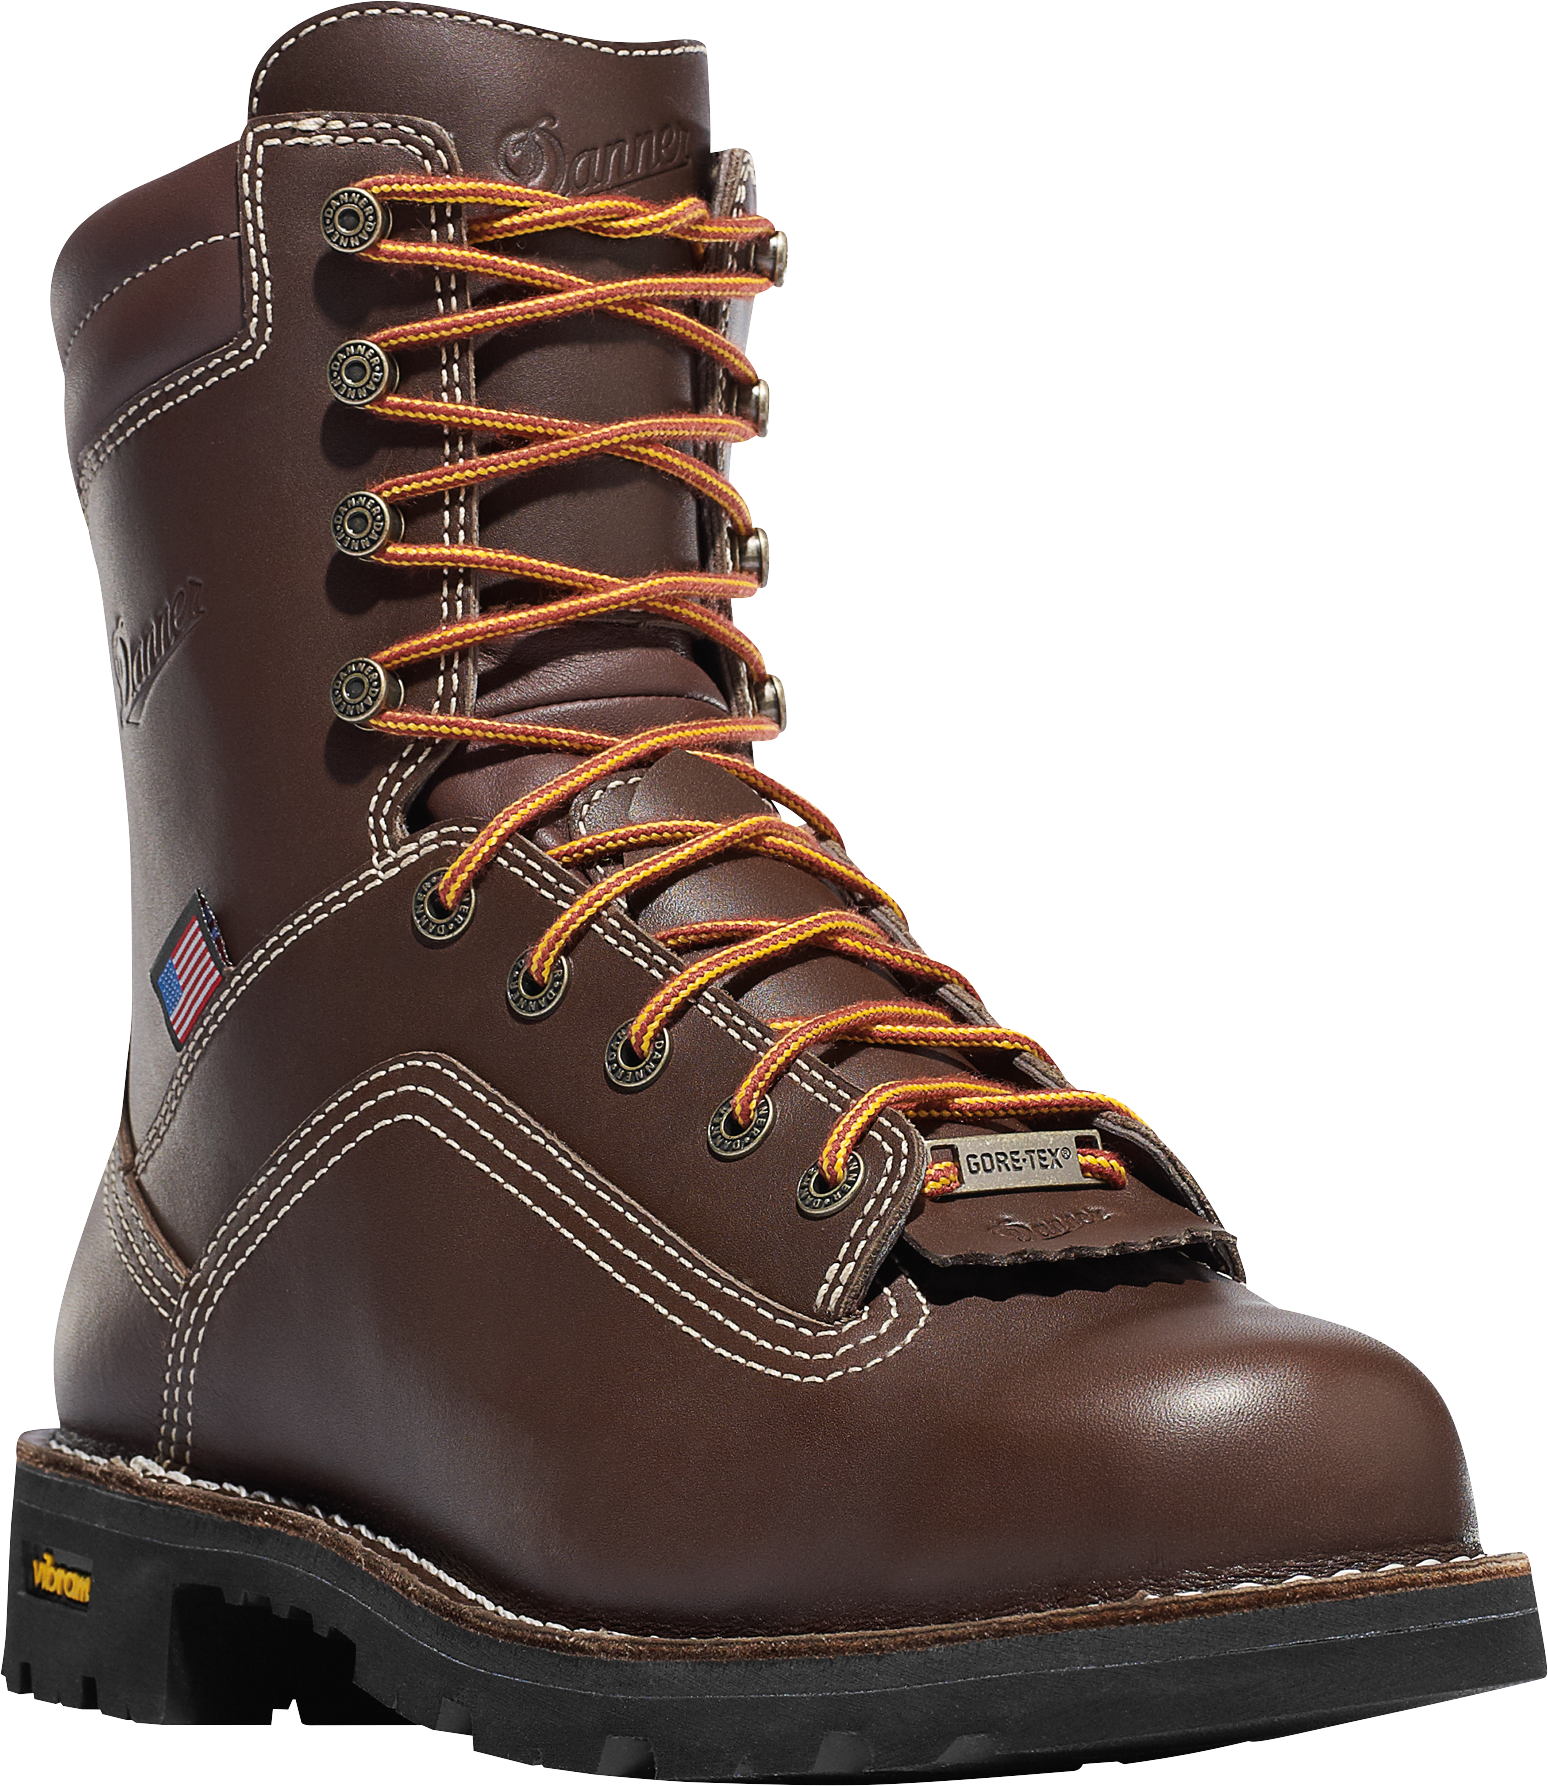 Danner Quarry USA Brown GORE-TEX Alloy Toe Work Boots for Men - Brown - 7.5M